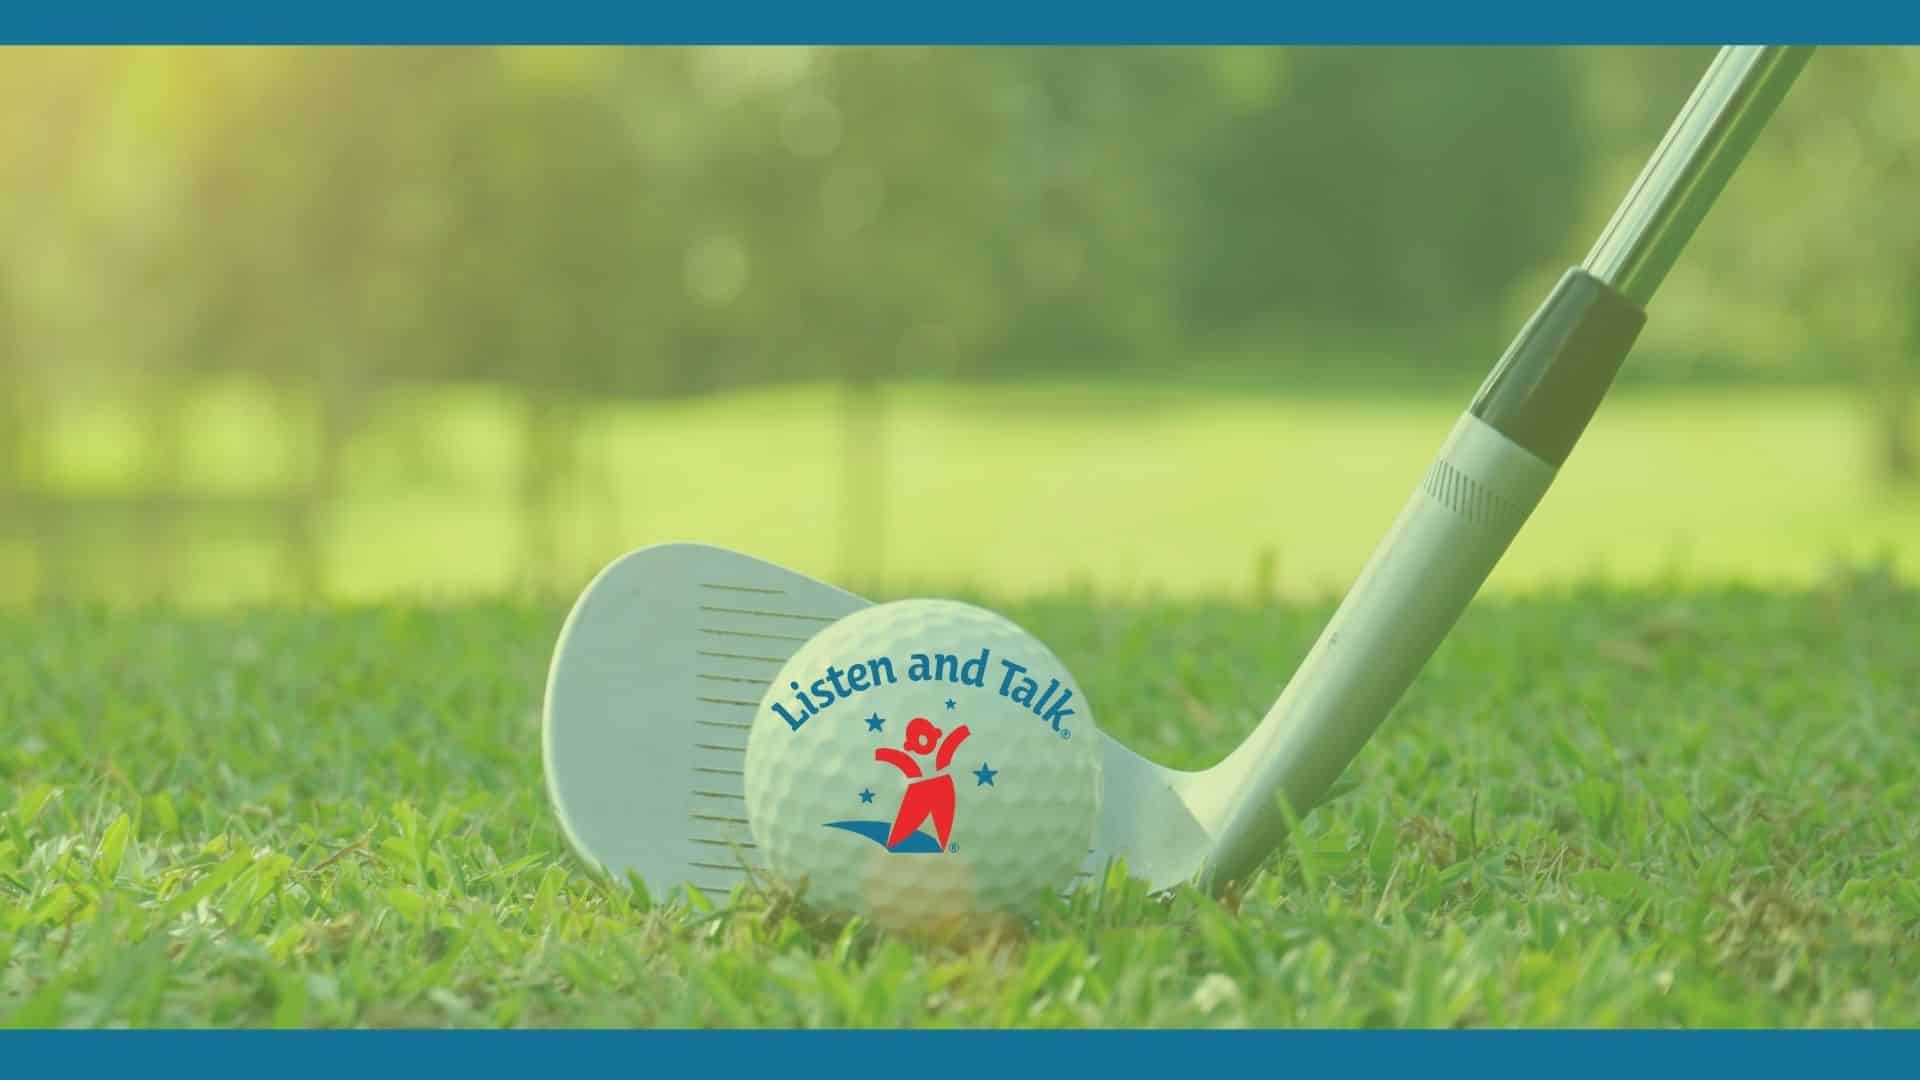 Golf club sitting on green grass lined up with a golf ball that has a listen and talk logo of a child with outstretched arms in red